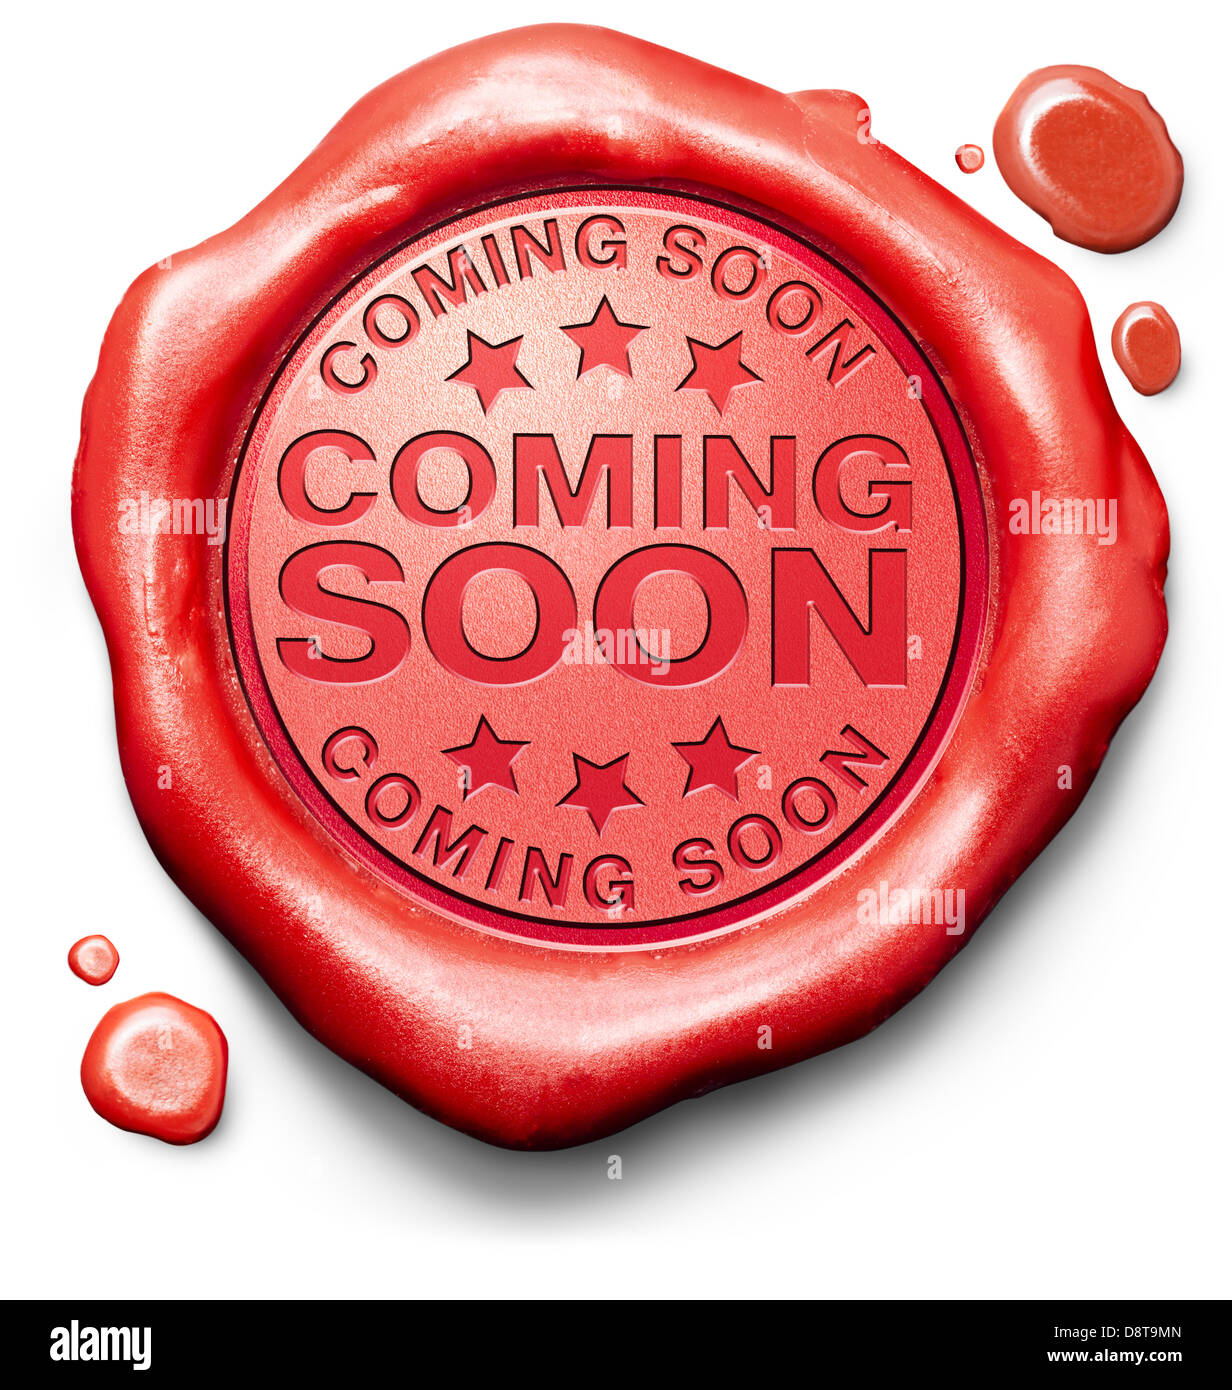 coming soon brand new product release next up promotion and announce red label icon or stamp Stock Photo